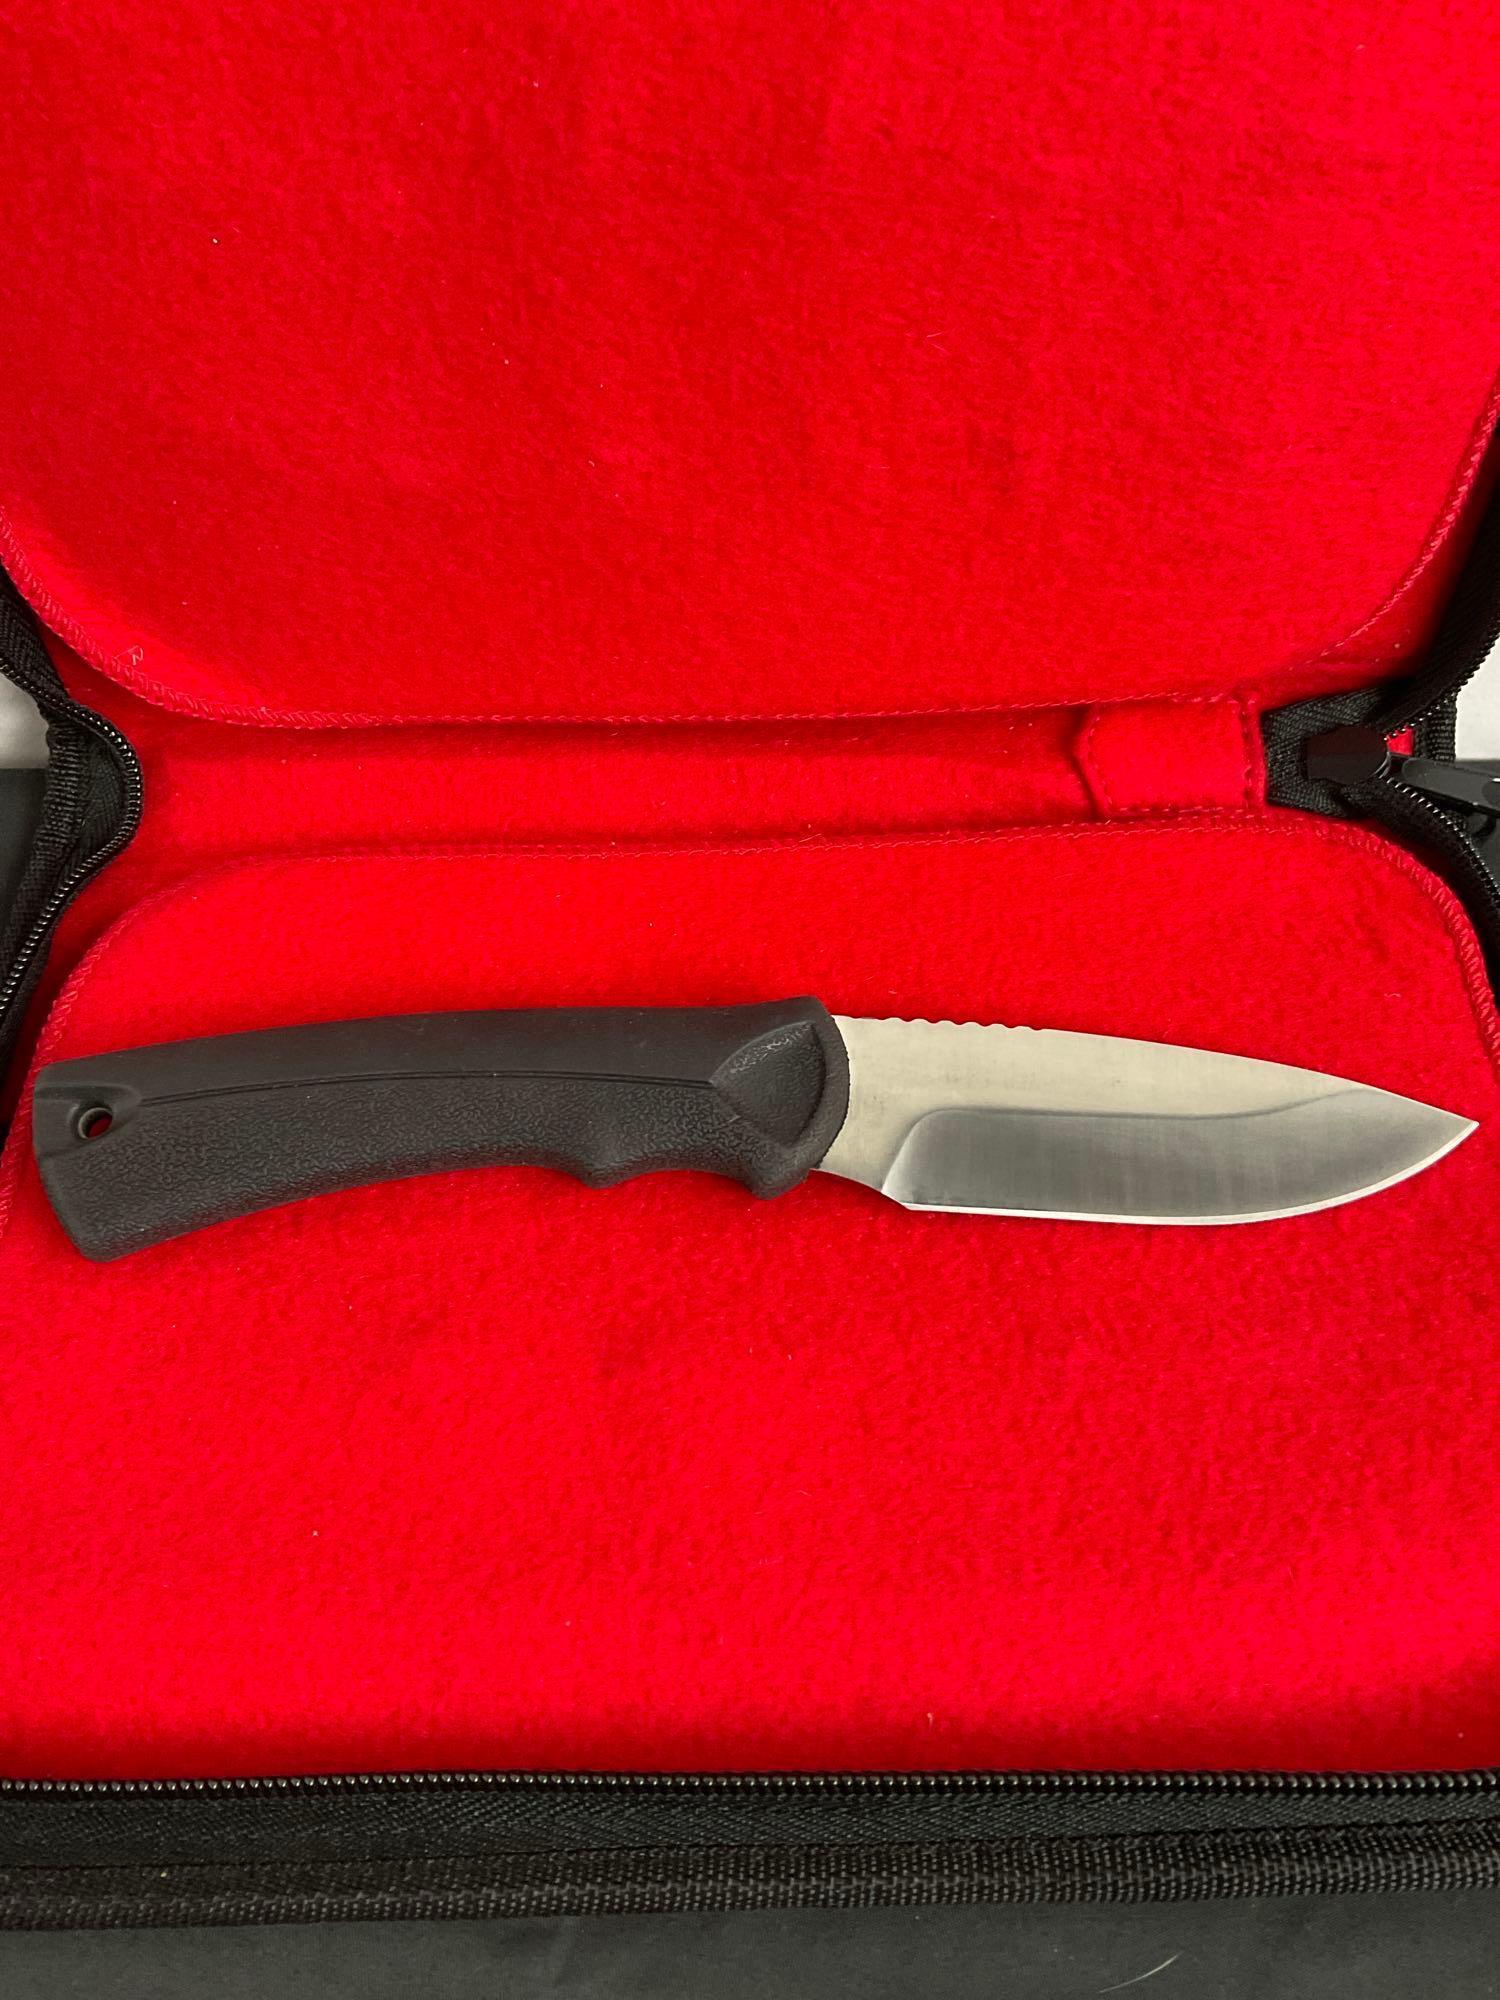 2x New In Box Buck Fixed Blade Knives in Sheathes - Numbered 679 & 113 - See pics